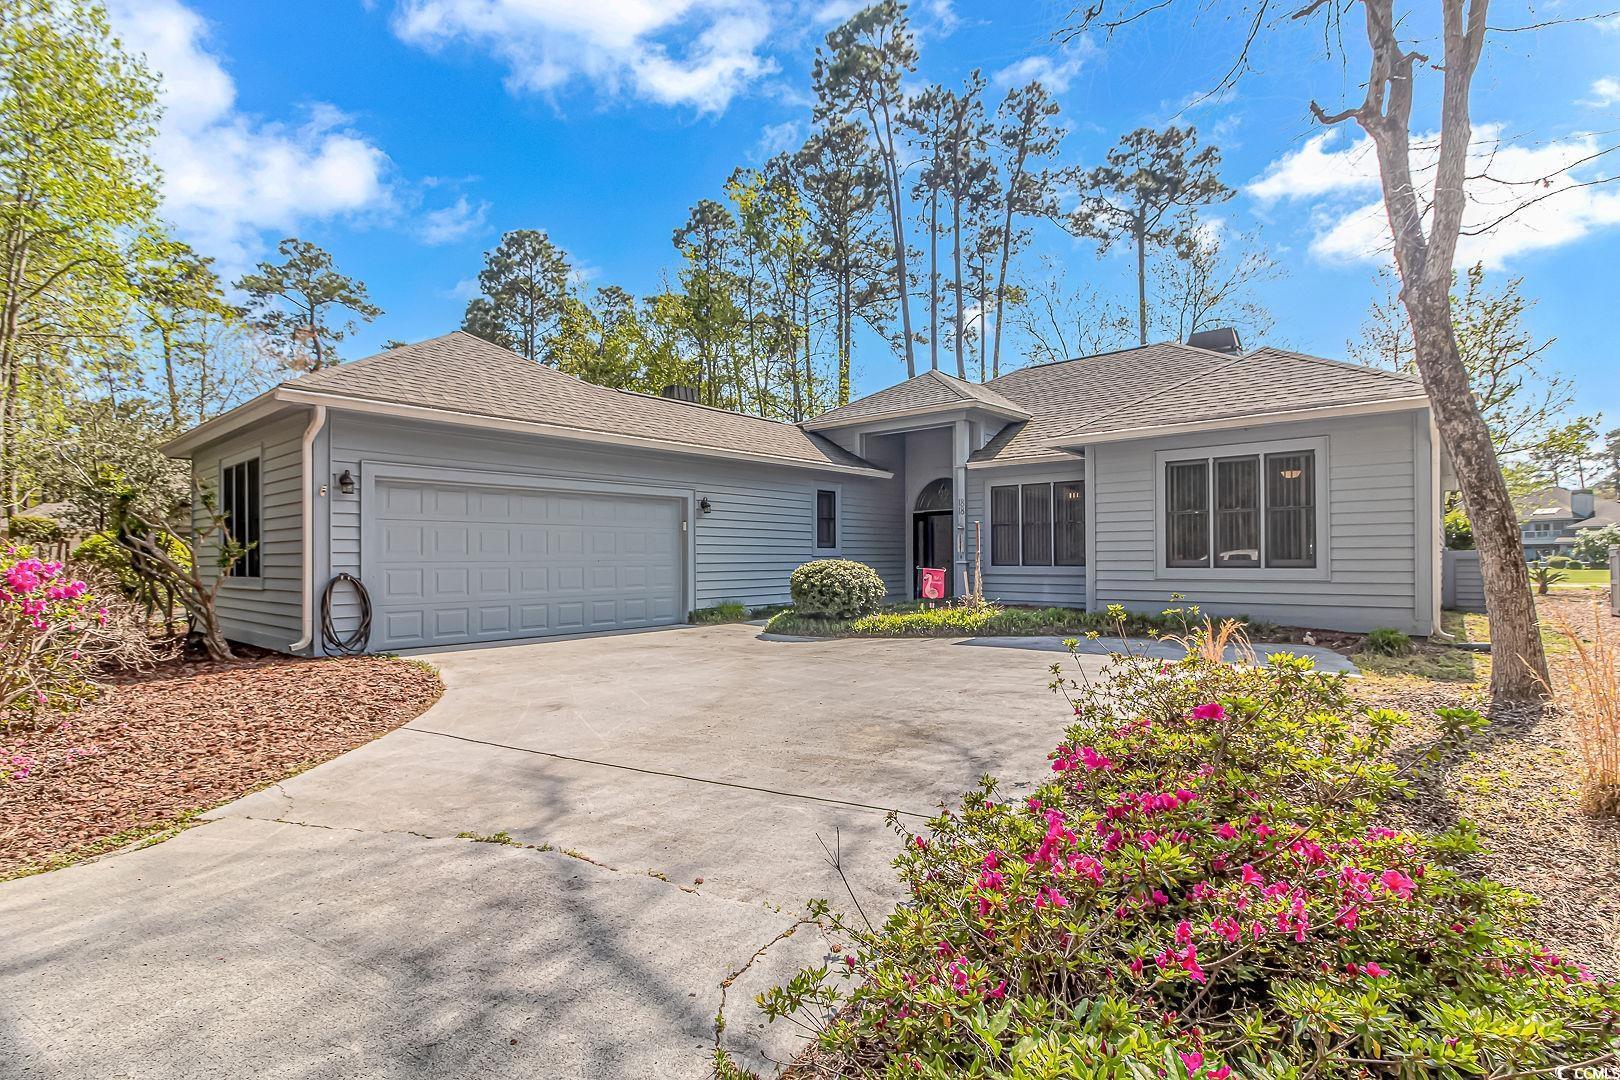 Photo one of 1818 Topsail Ln. North Myrtle Beach SC 29582 | MLS 2408412